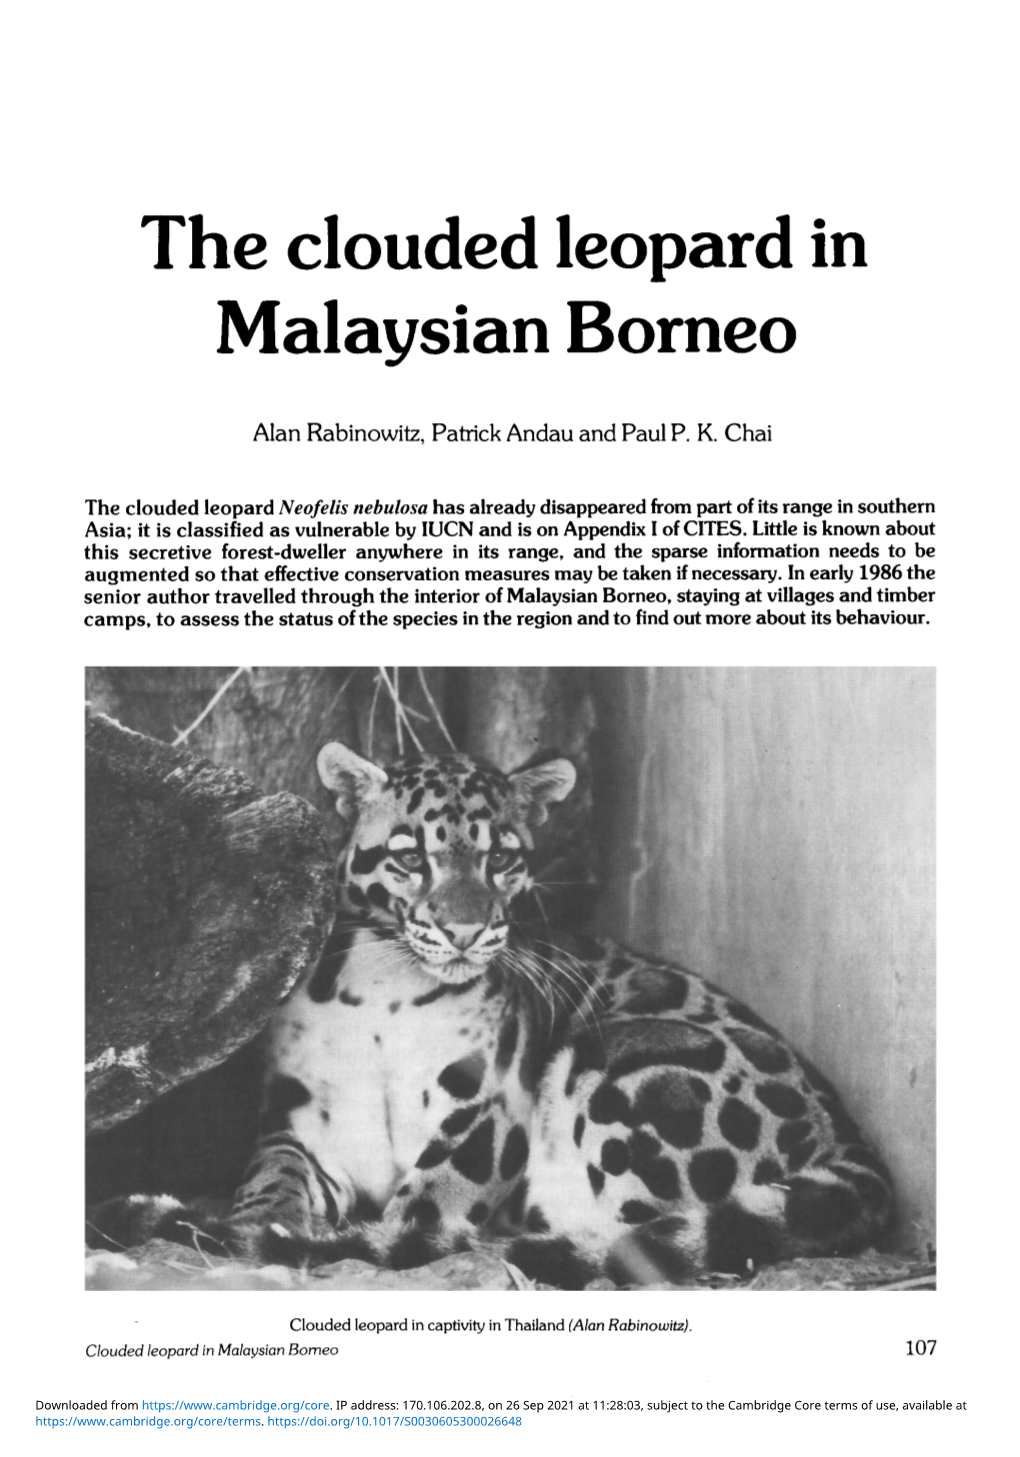 The Clouded Leopard in Malaysian Borneo